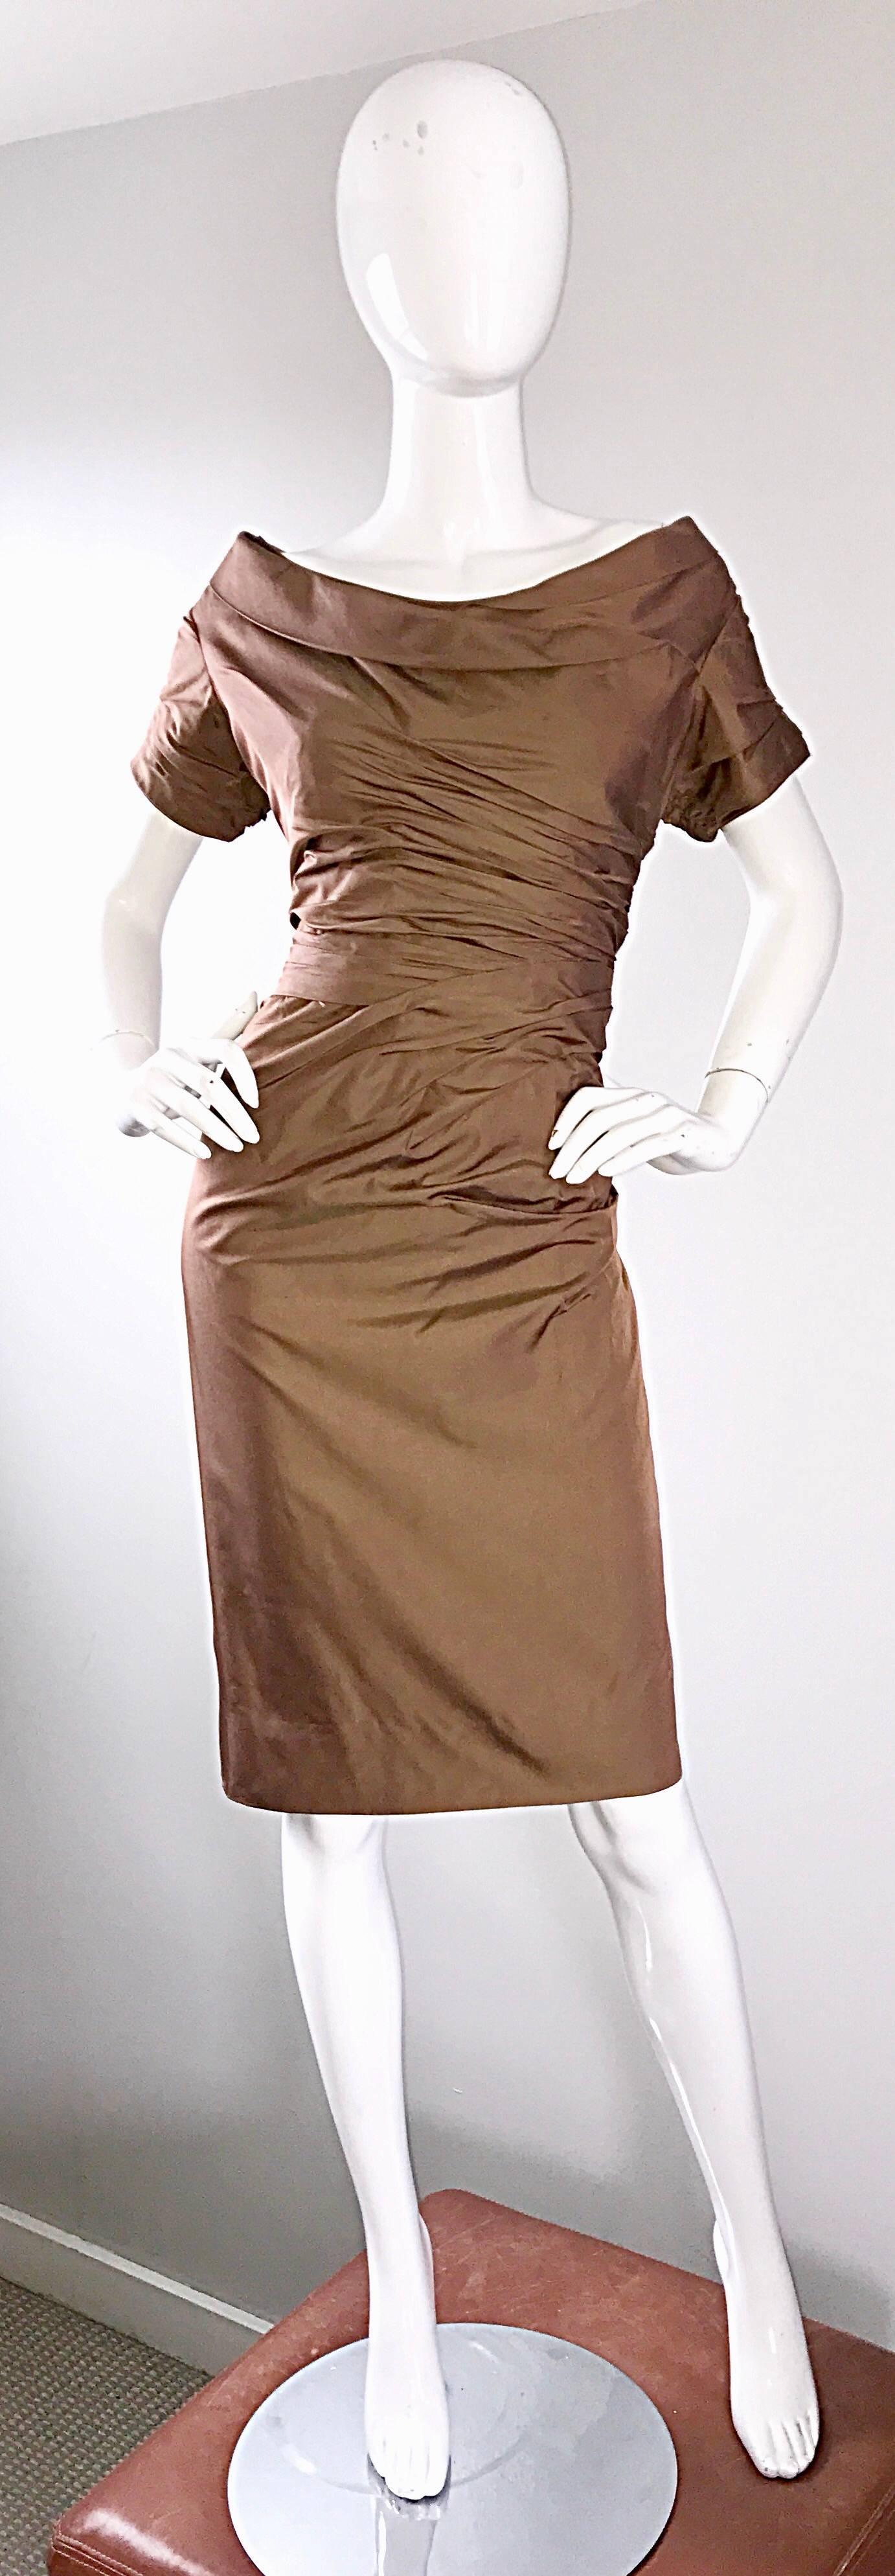 Gorgeous 1950s CEIL CHAPMAN plus size light brown / peanut color silk taffeta wiggle dress! Chapman was a favorite amongst 50s starlets such as Marilyn Monroe, Elizabeth Taylor, and Jayne Mansfield, just to name a few. Her insane attention to detail